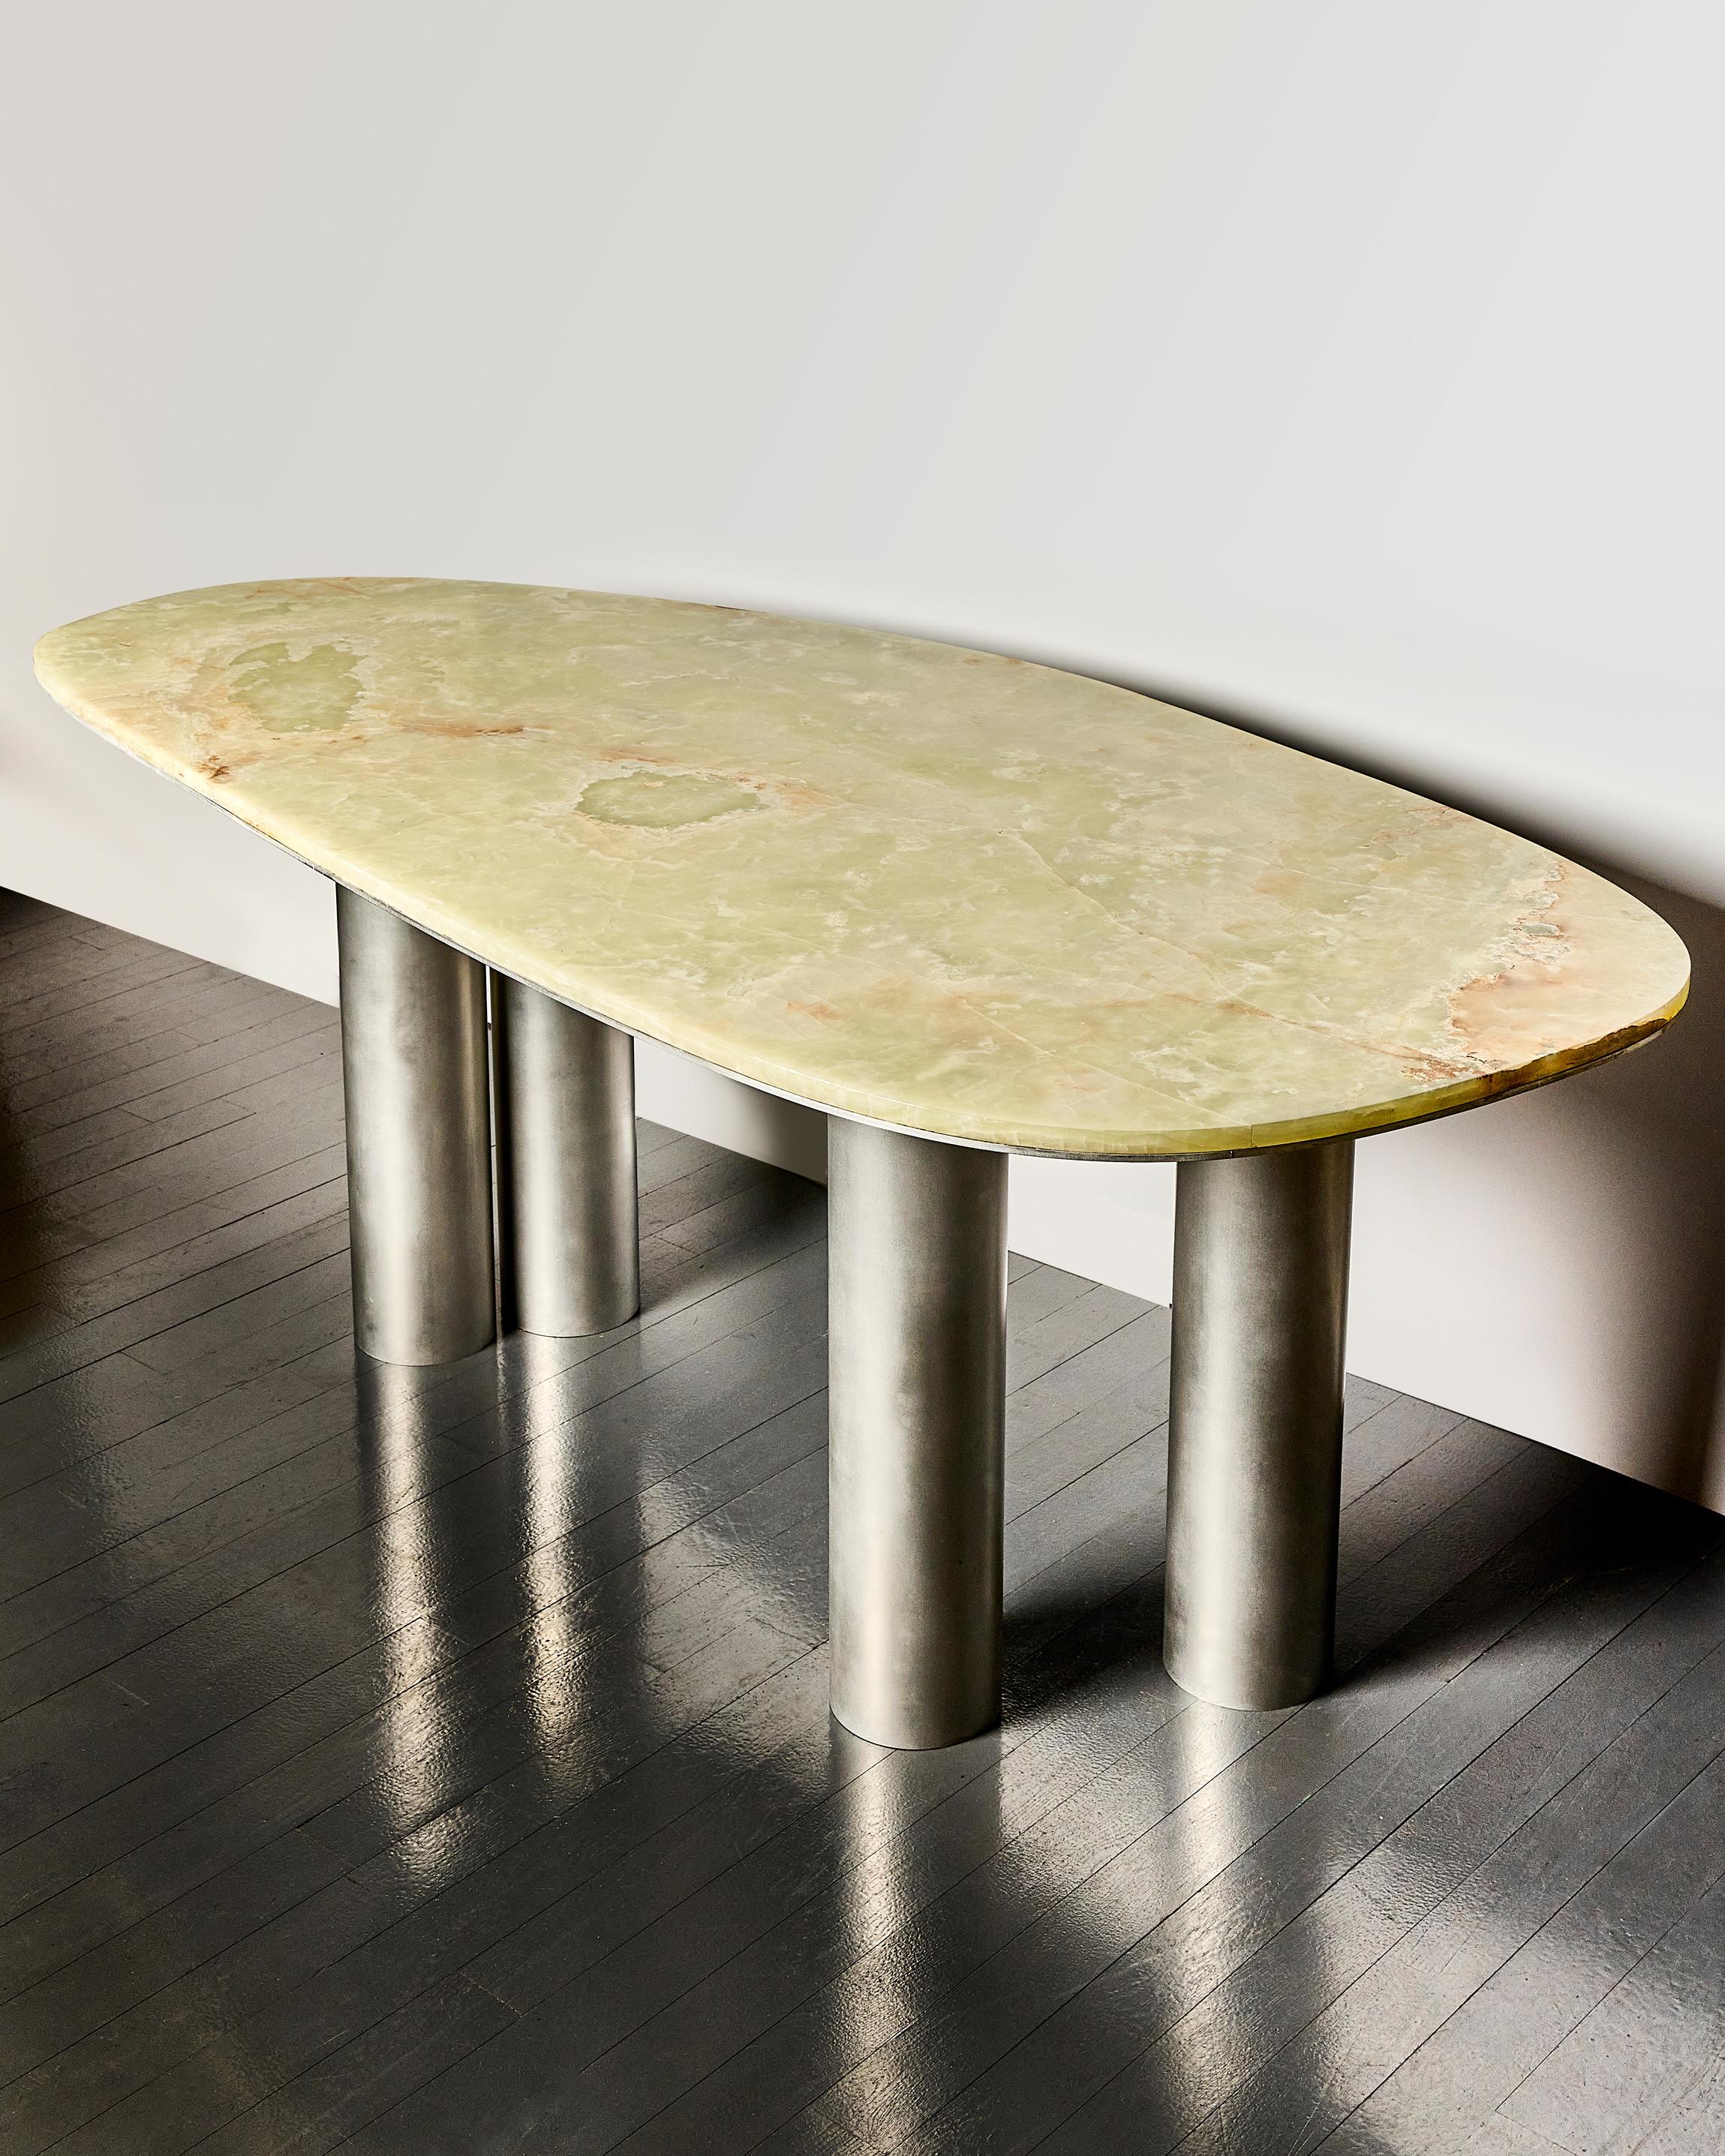 American Green Onyx Desk with Brushed Aluminum or Brass Base For Sale